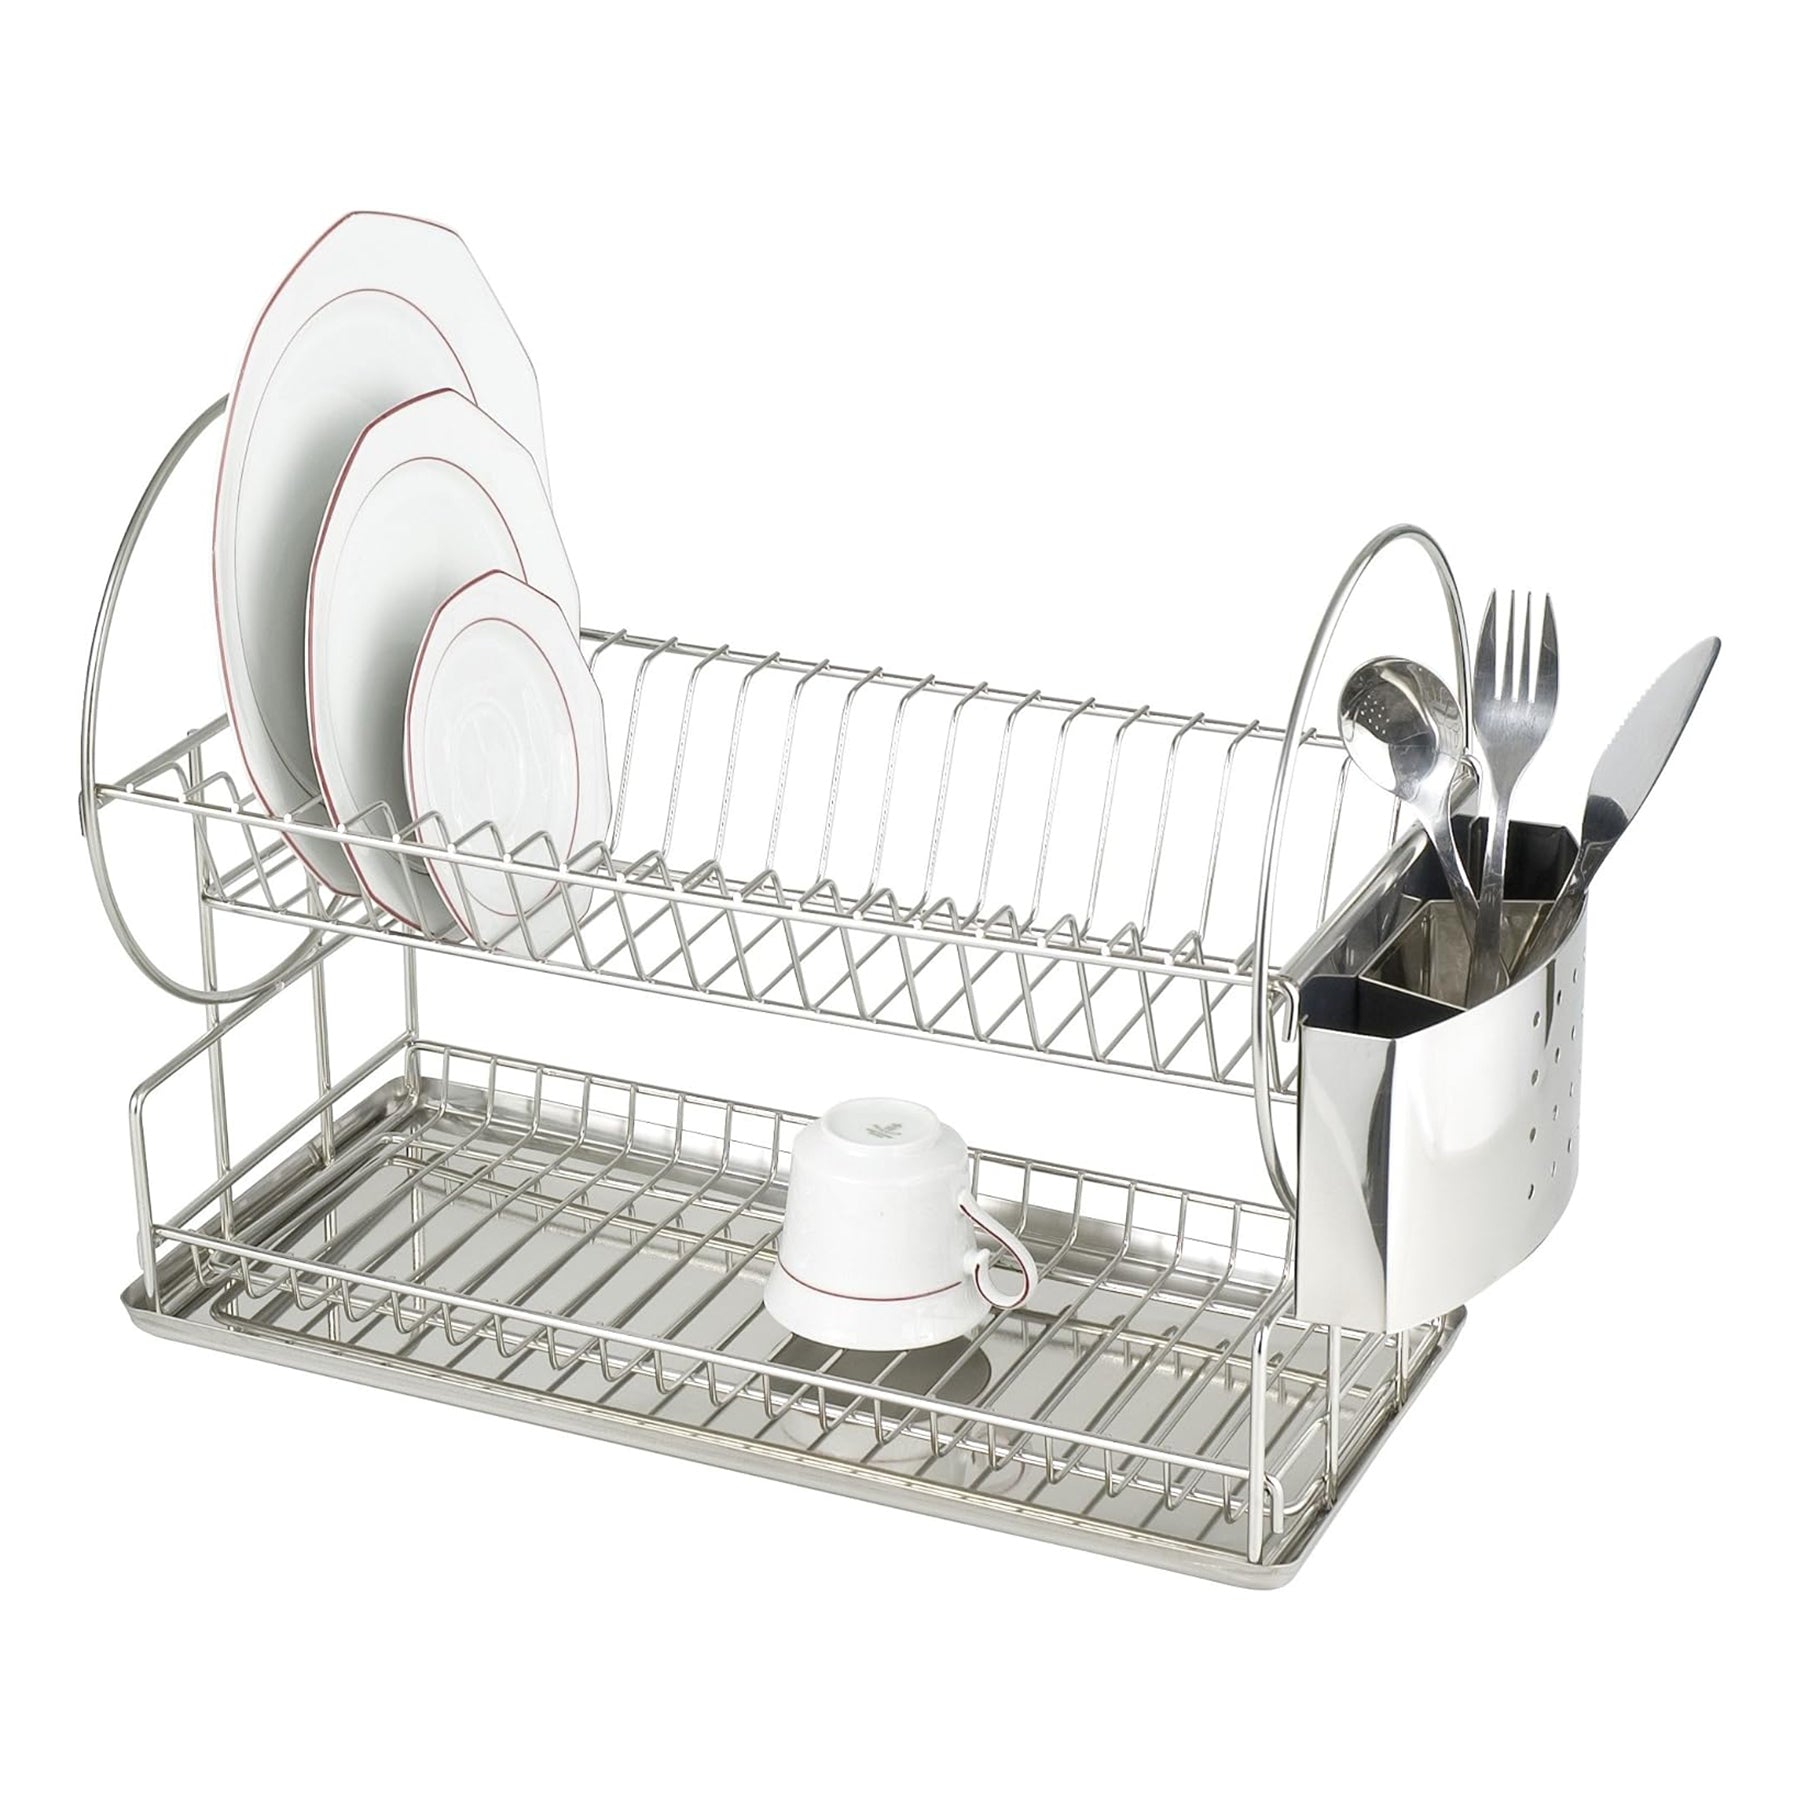 Dish Plate Holder - Silver